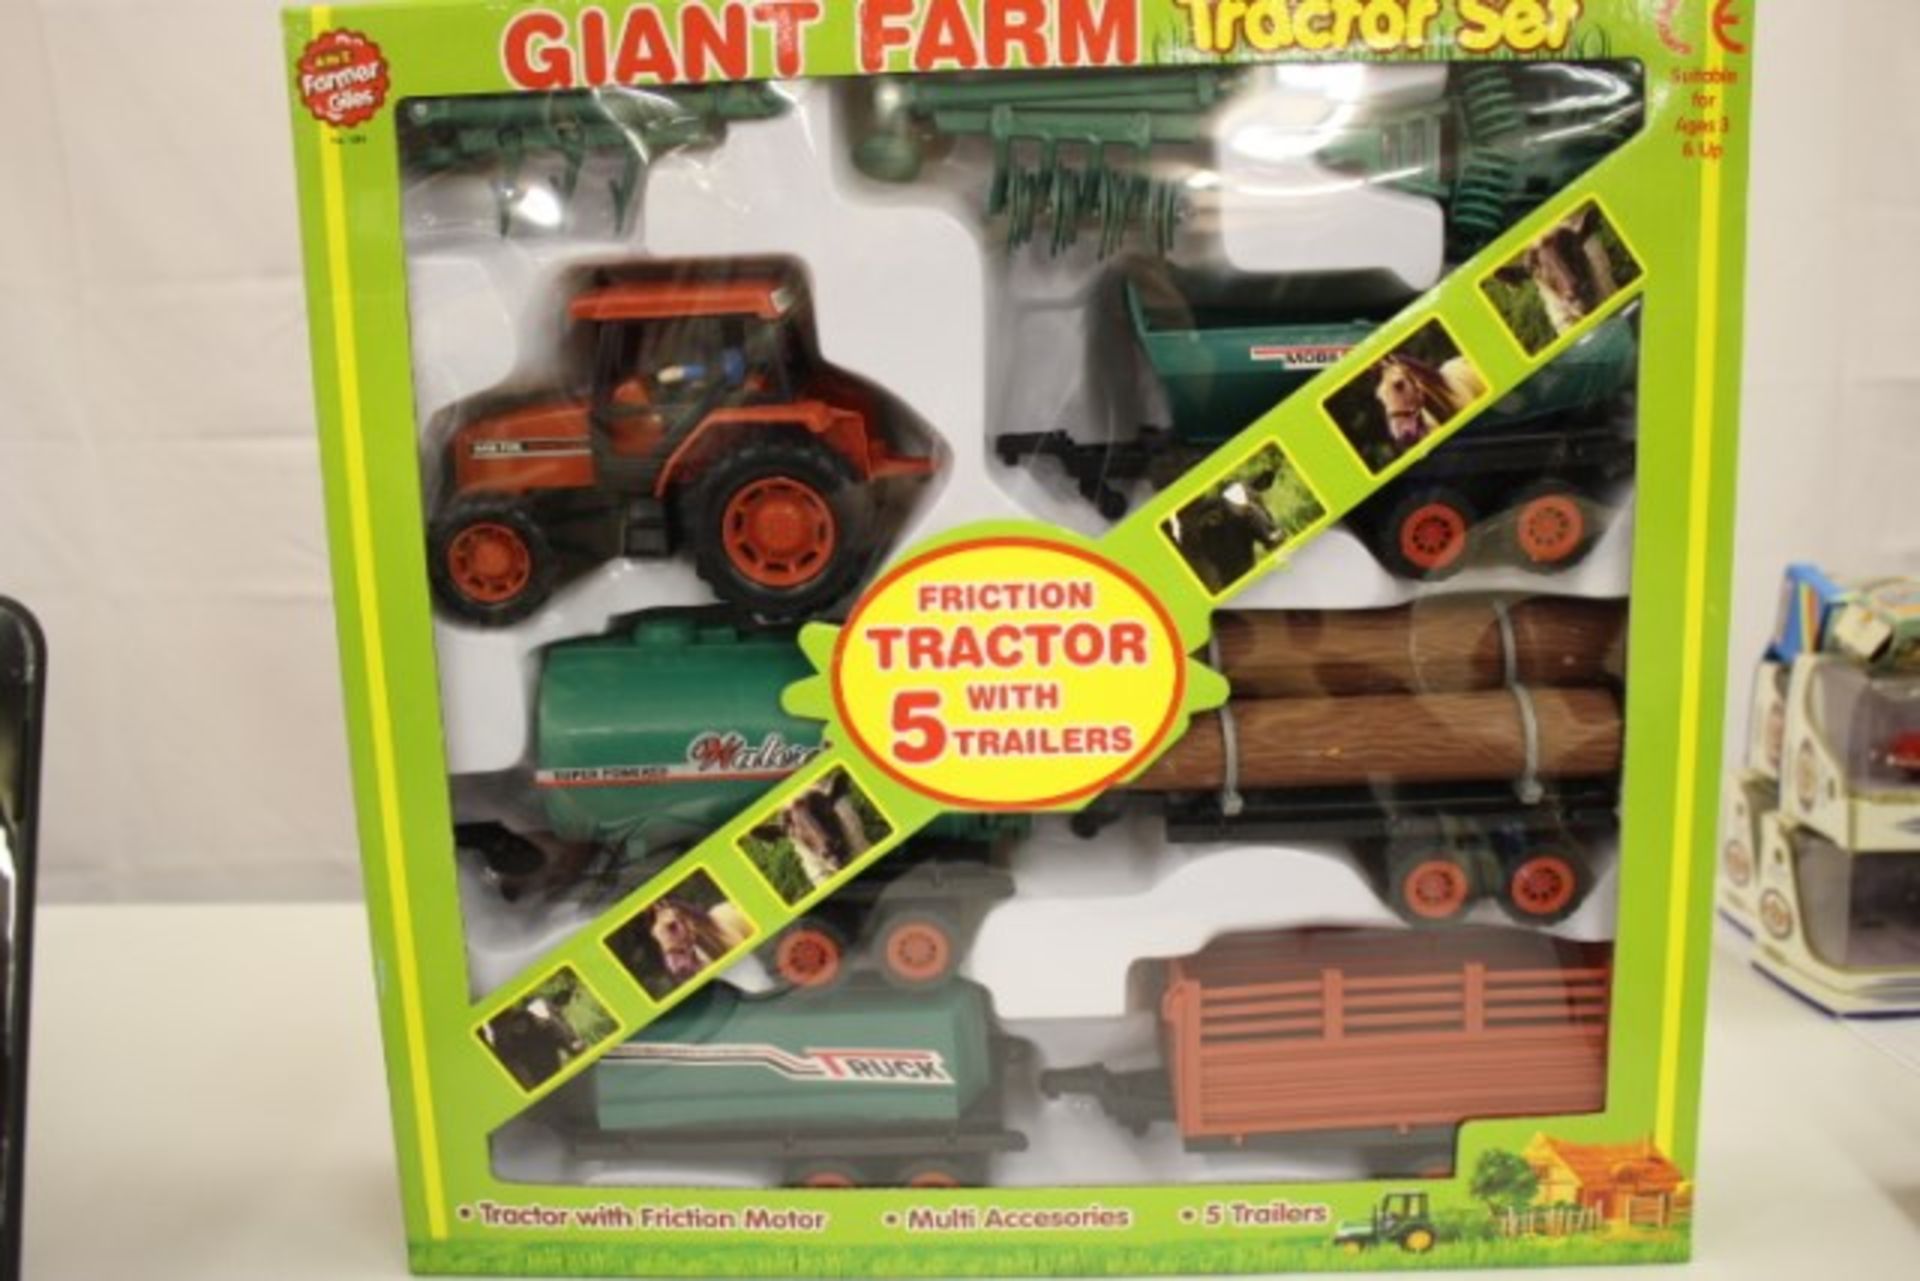 V Brand New Giant Farm Tractor Set SRP £19.99 X 2 YOUR BID PRICE TO BE MULTIPLIED BY TWO